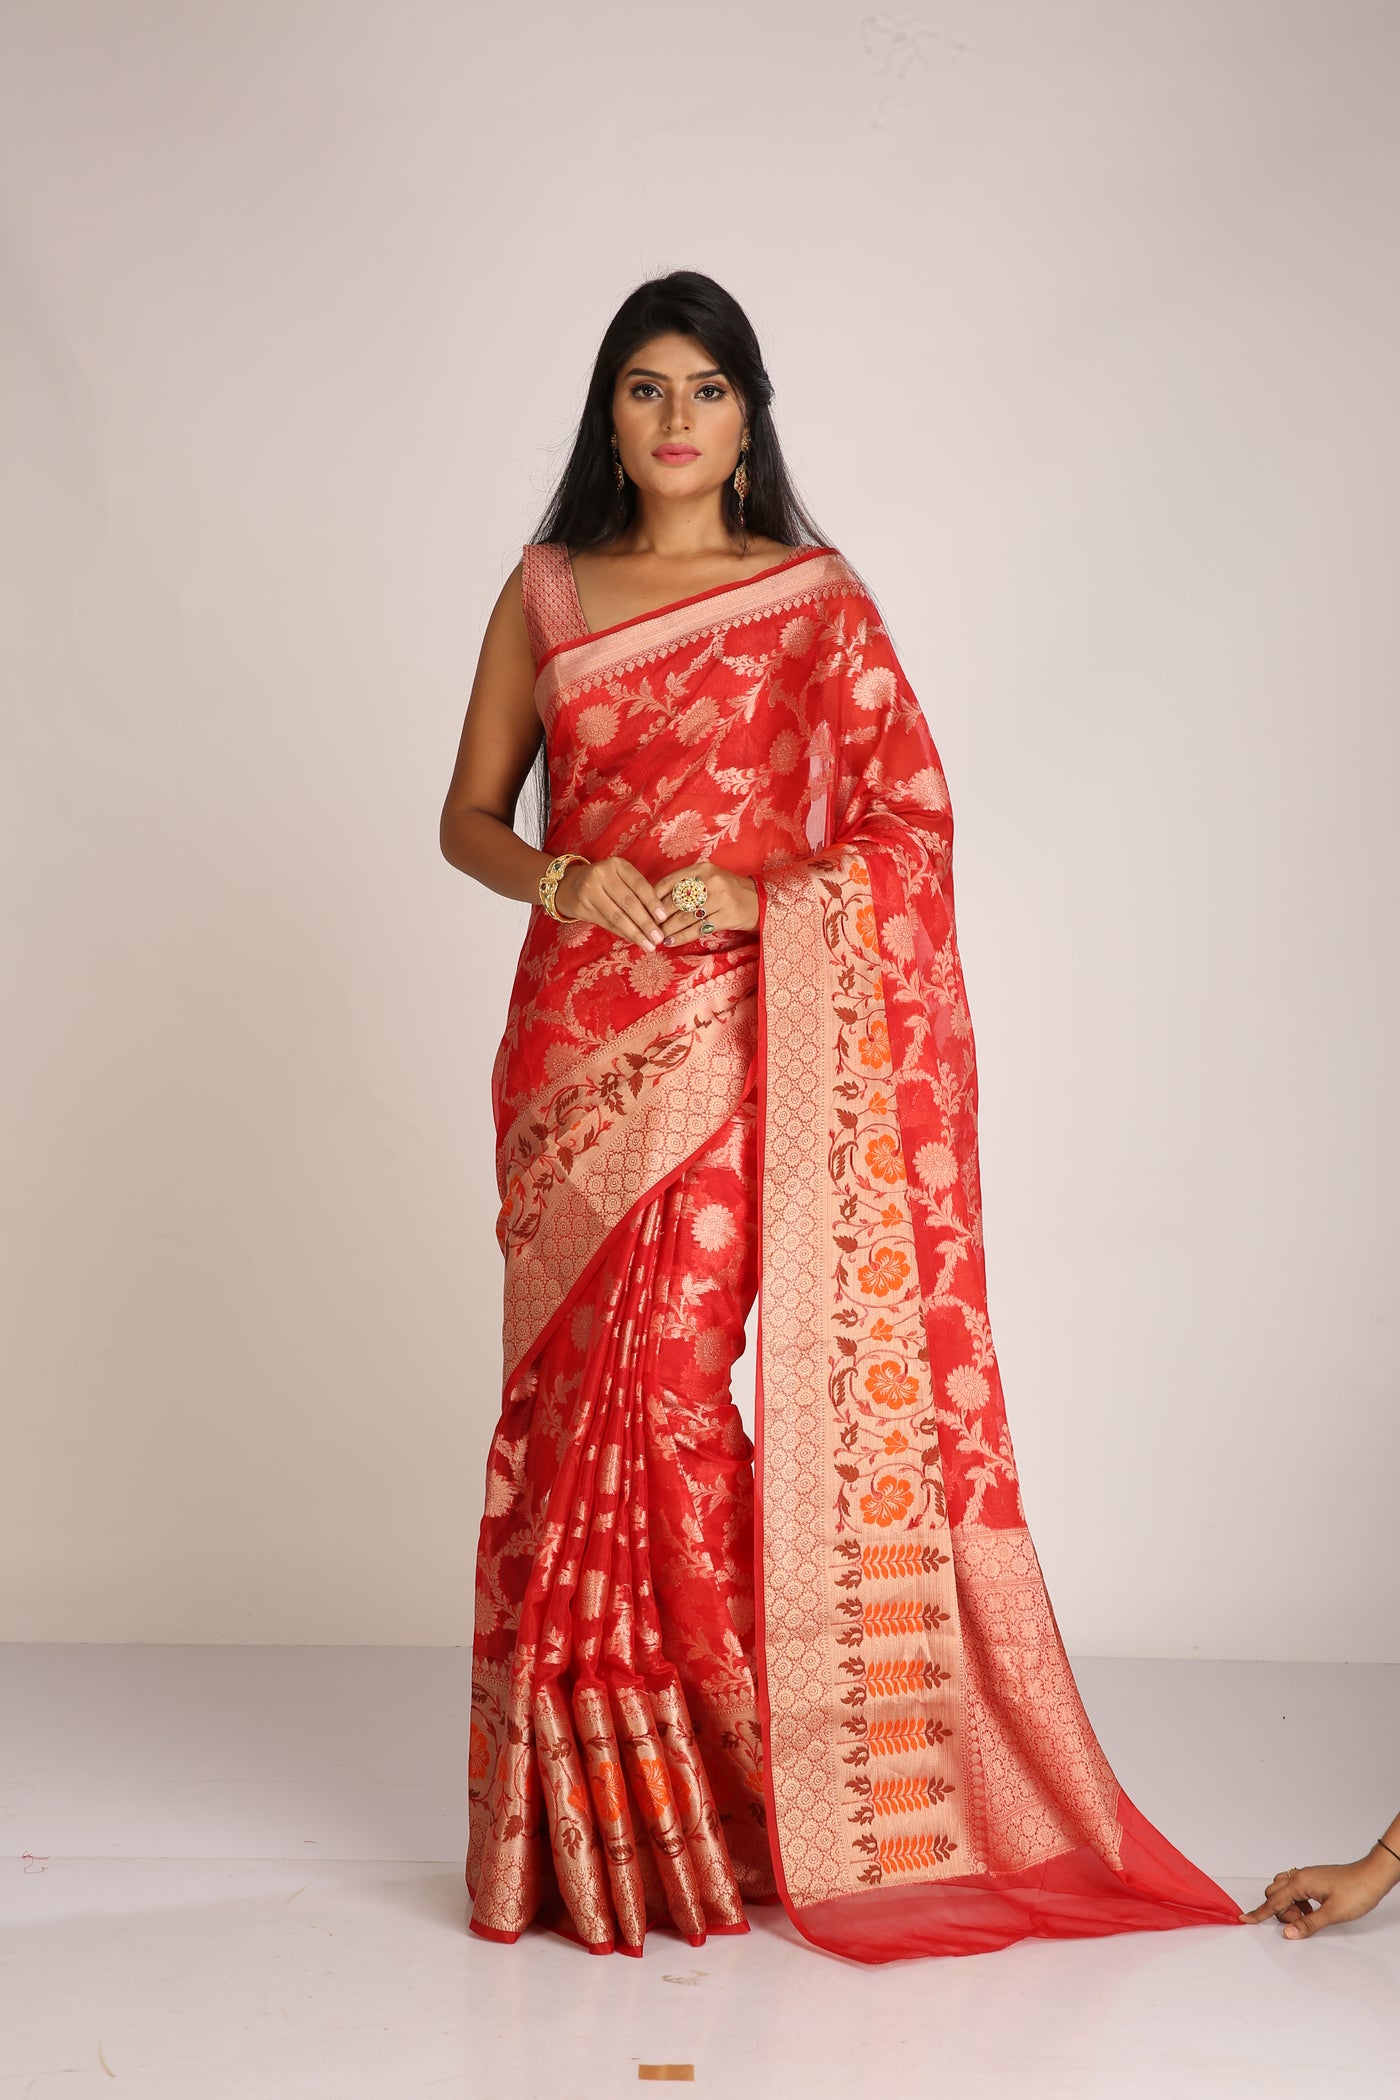 Banarsi Saree in Red with Gold - Indian Clothing in Denver, CO, Aurora, CO, Boulder, CO, Fort Collins, CO, Colorado Springs, CO, Parker, CO, Highlands Ranch, CO, Cherry Creek, CO, Centennial, CO, and Longmont, CO. Nationwide shipping USA - India Fashion X